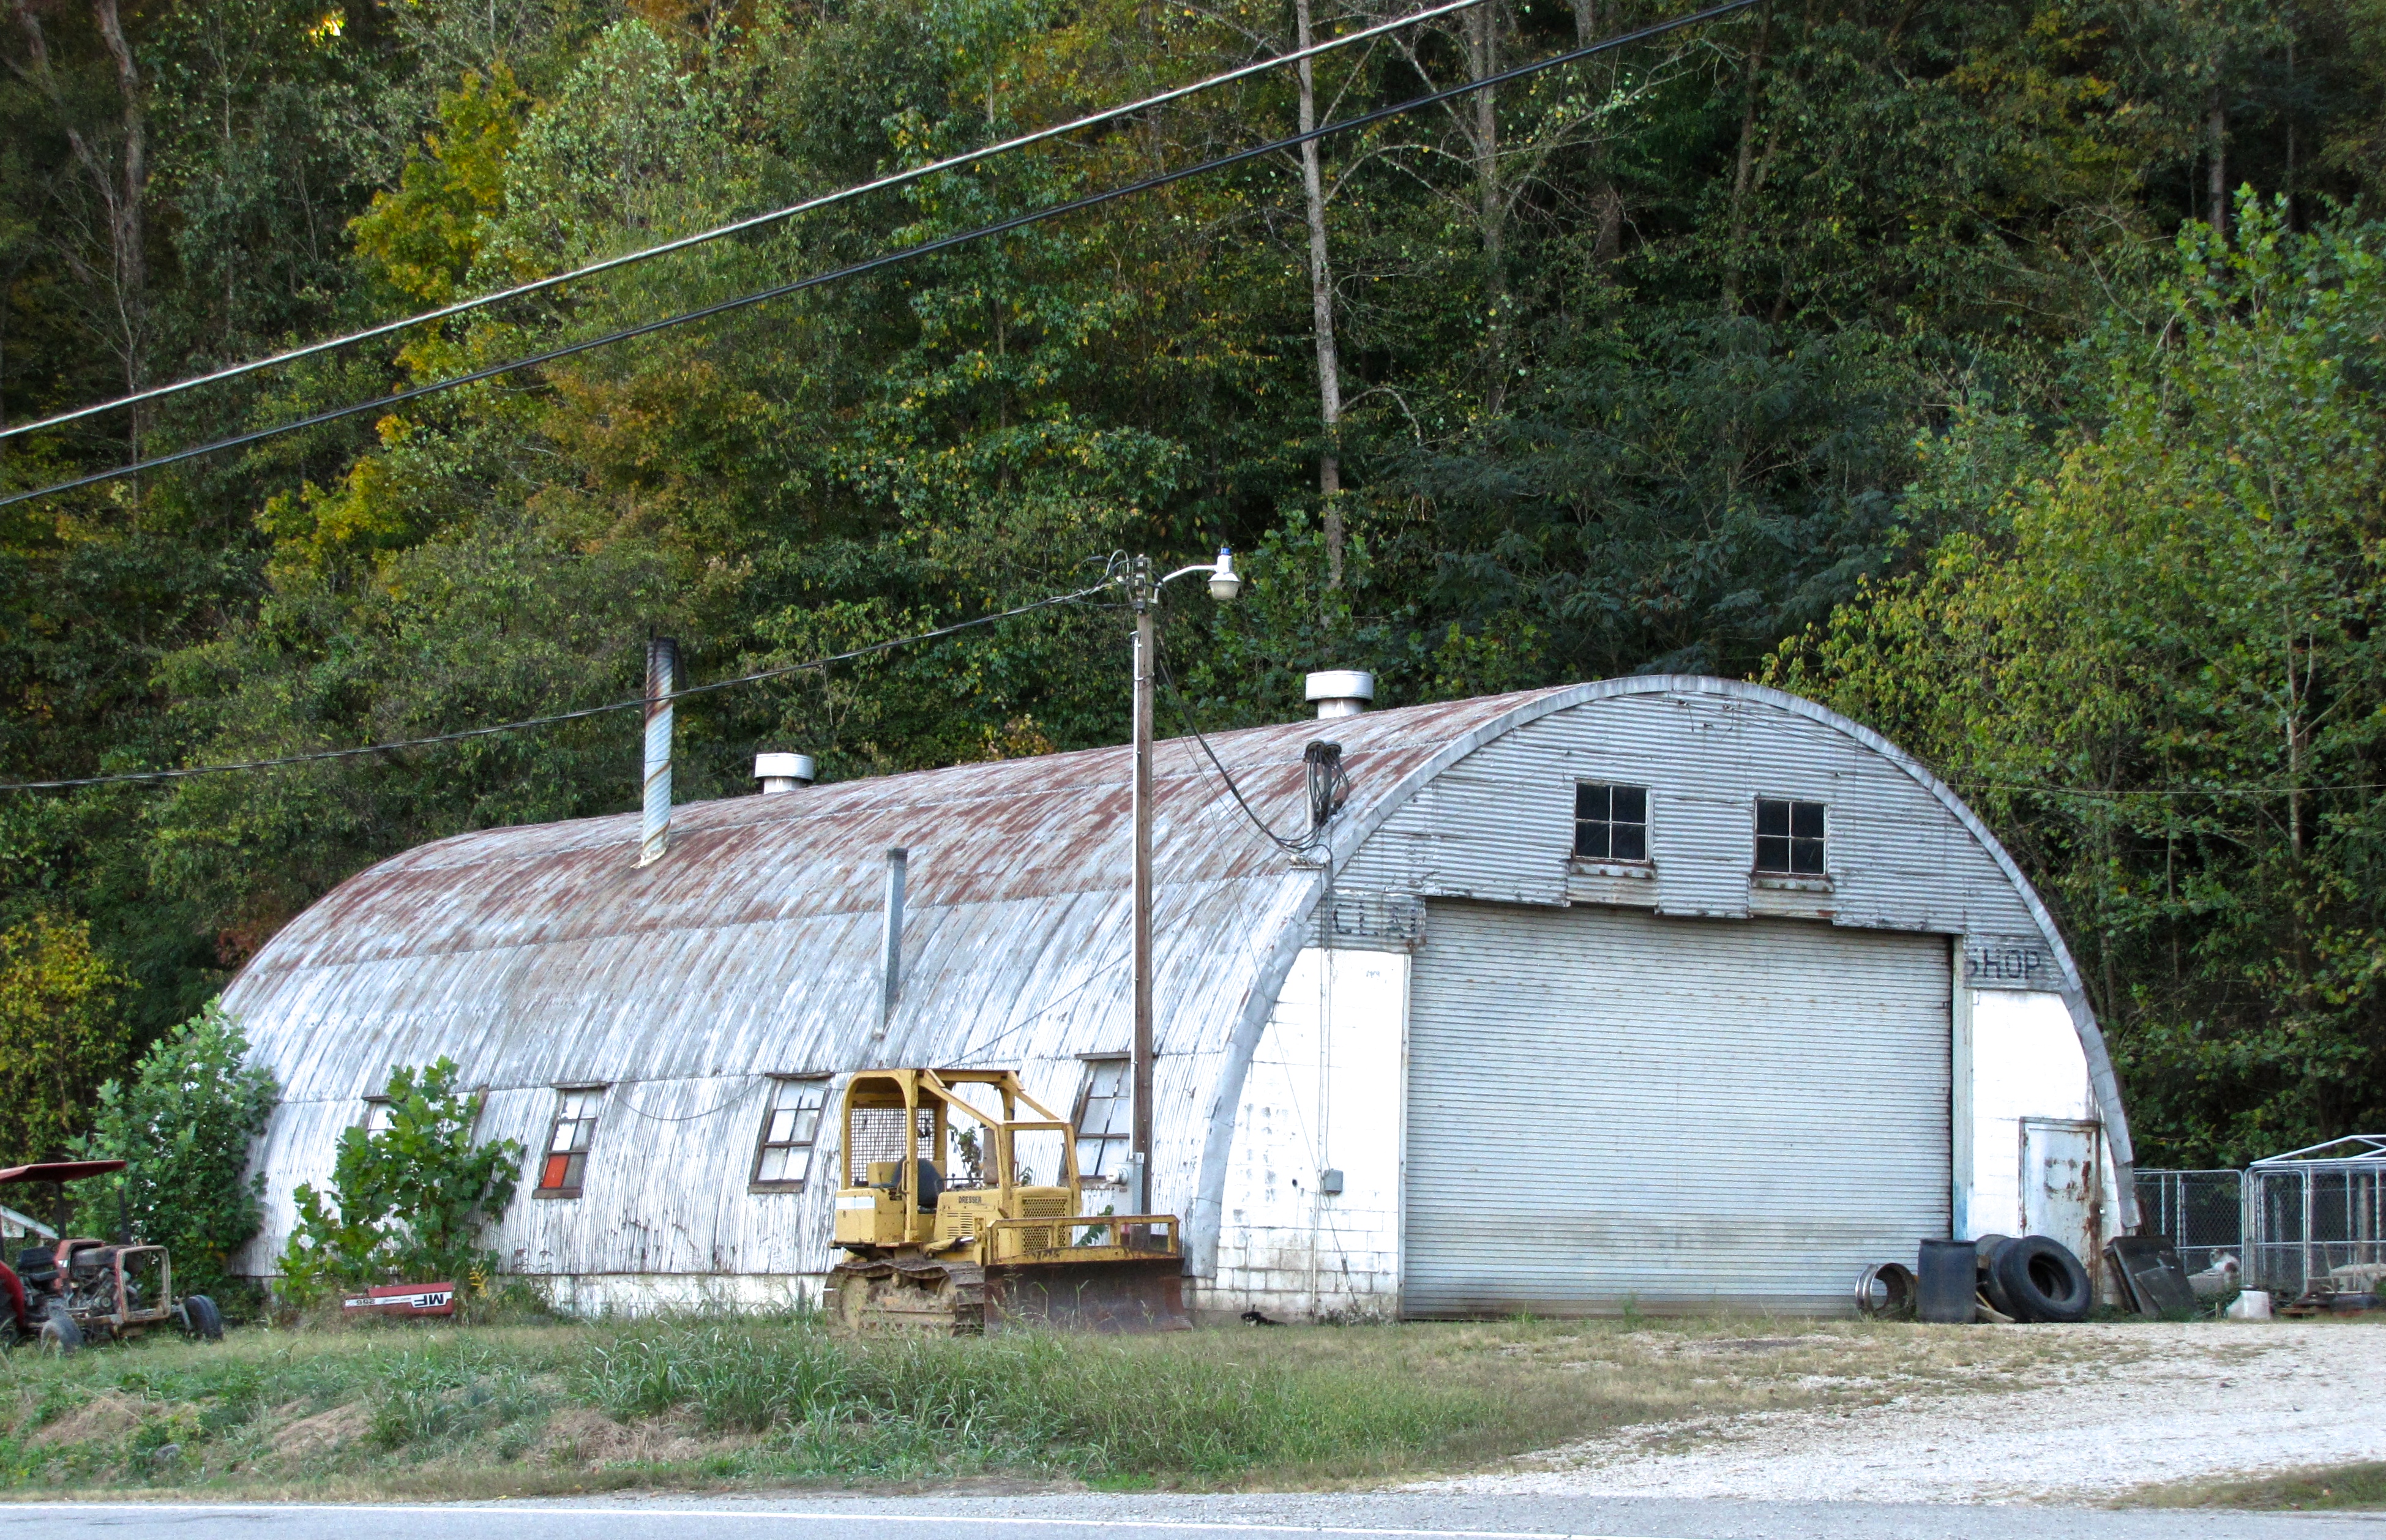 quonset hut in Terms Of Service, GA